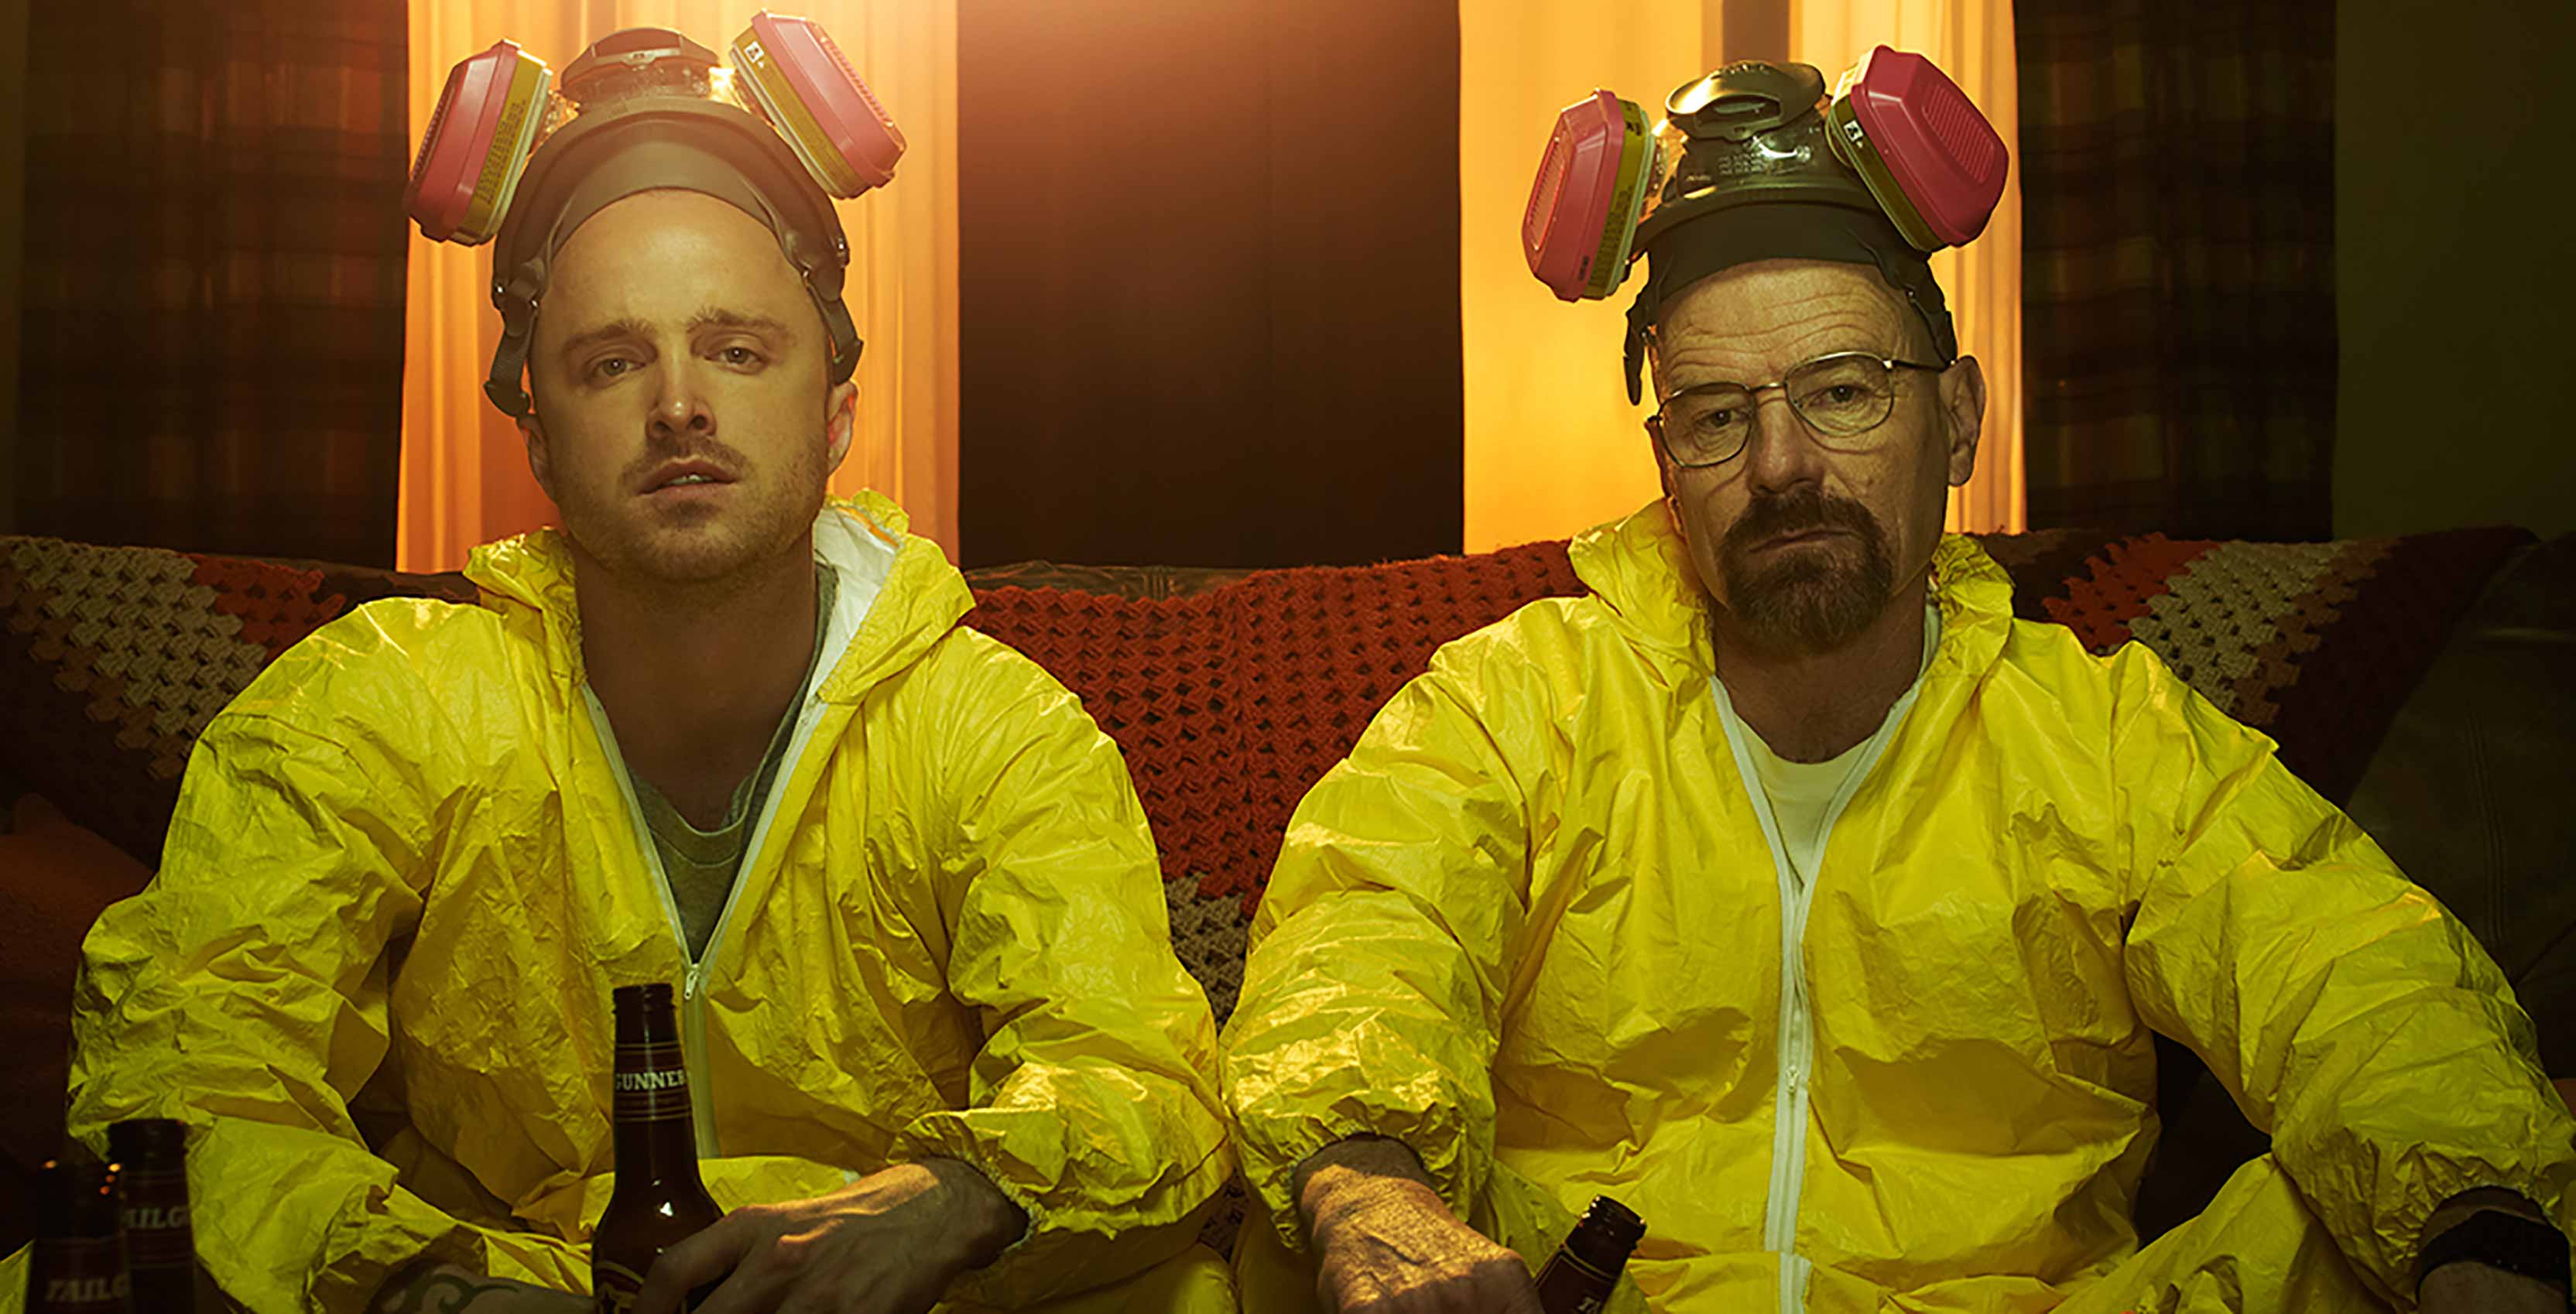 Breaking Bad Walt and Jesse in chem suits